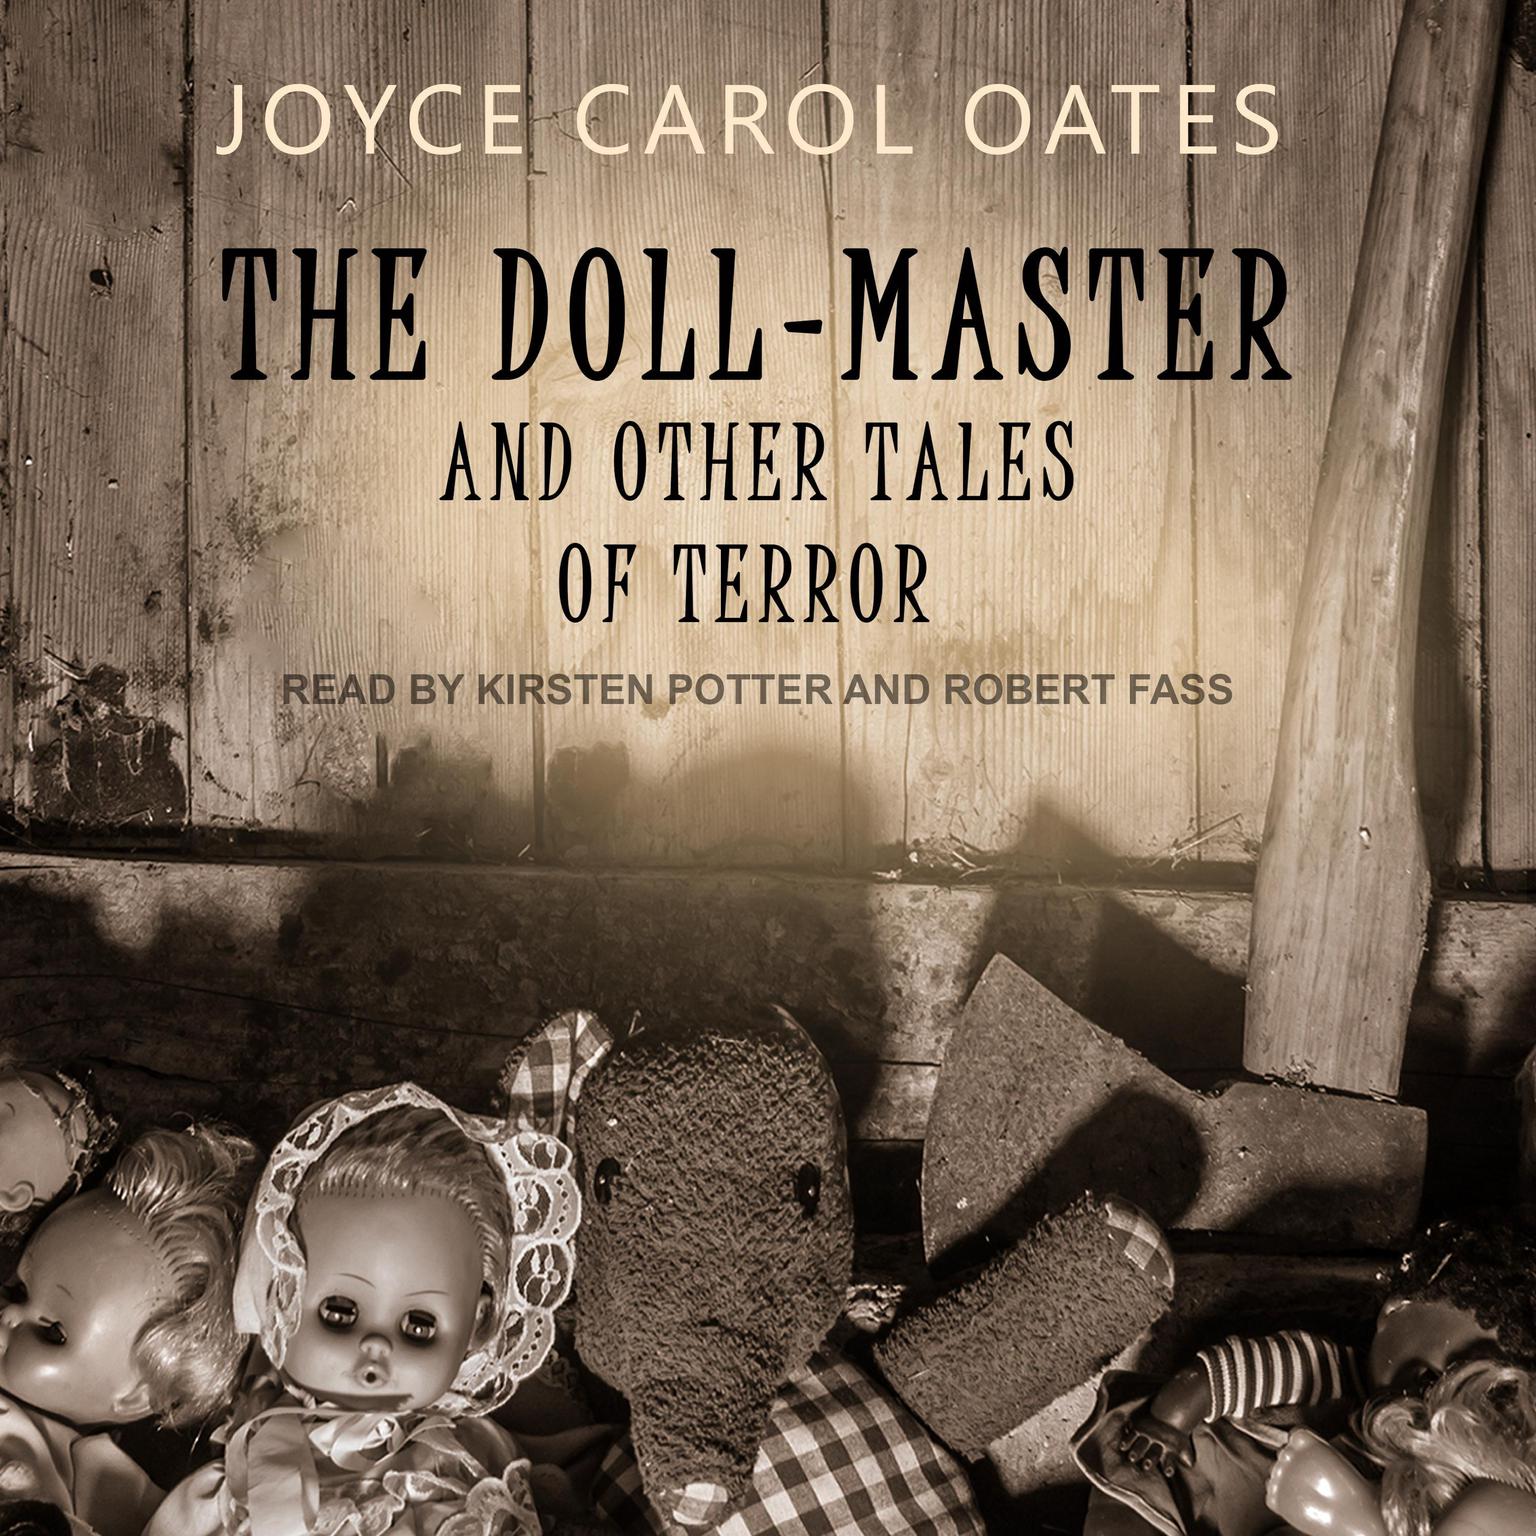 The Doll-Master: And Other Tales of Terror Audiobook, by Joyce Carol Oates